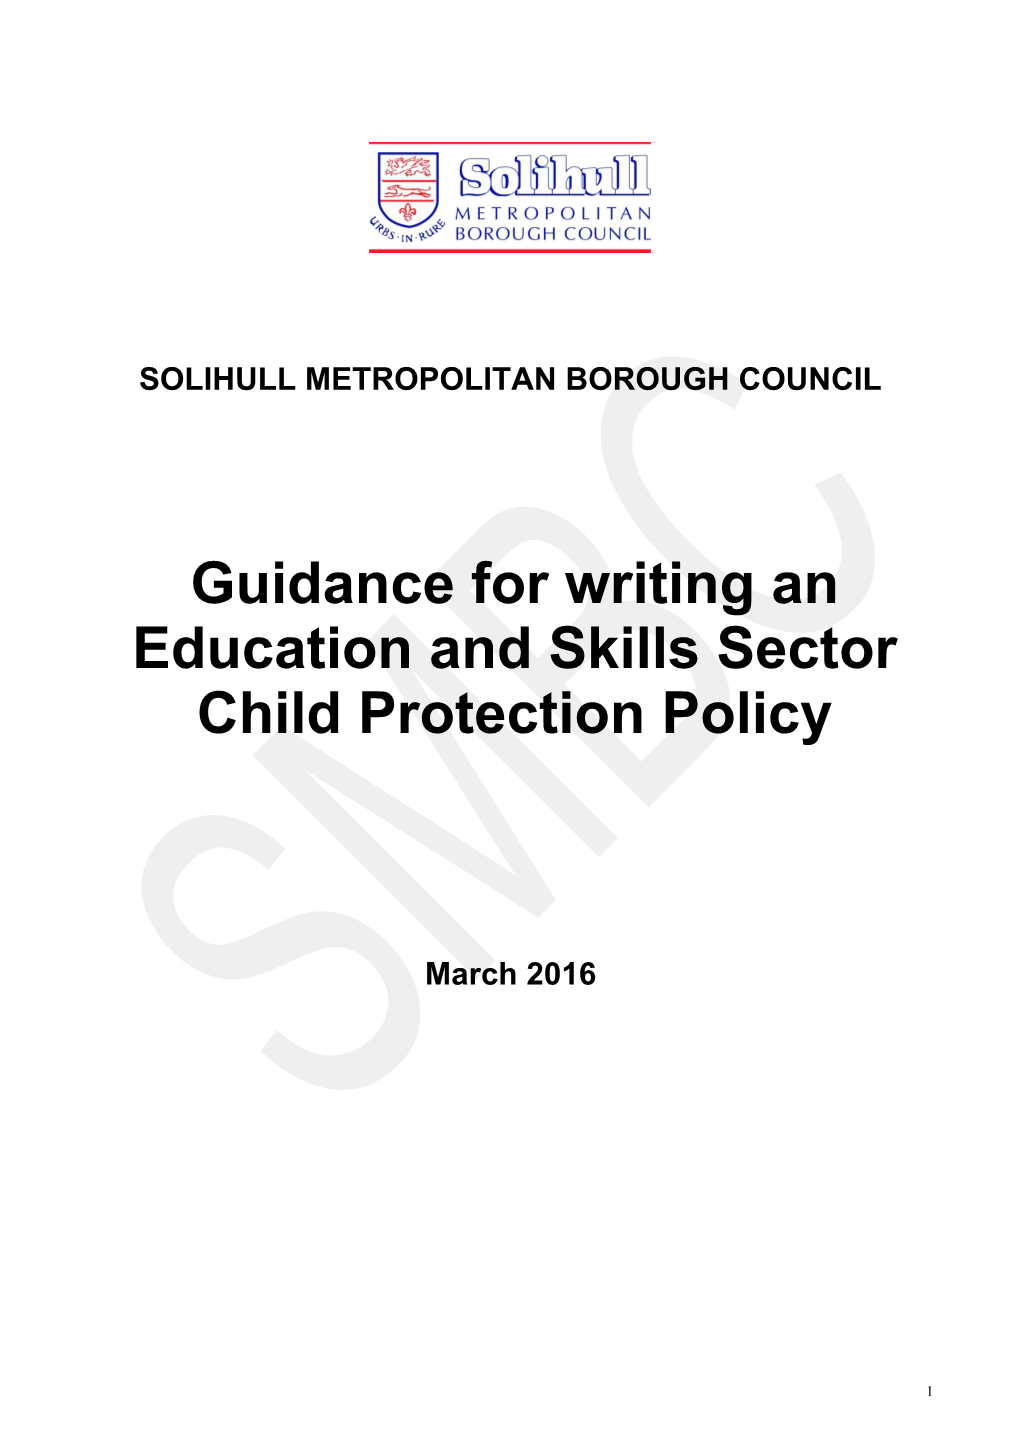 Model Child Protection Policy Update Feb 2014